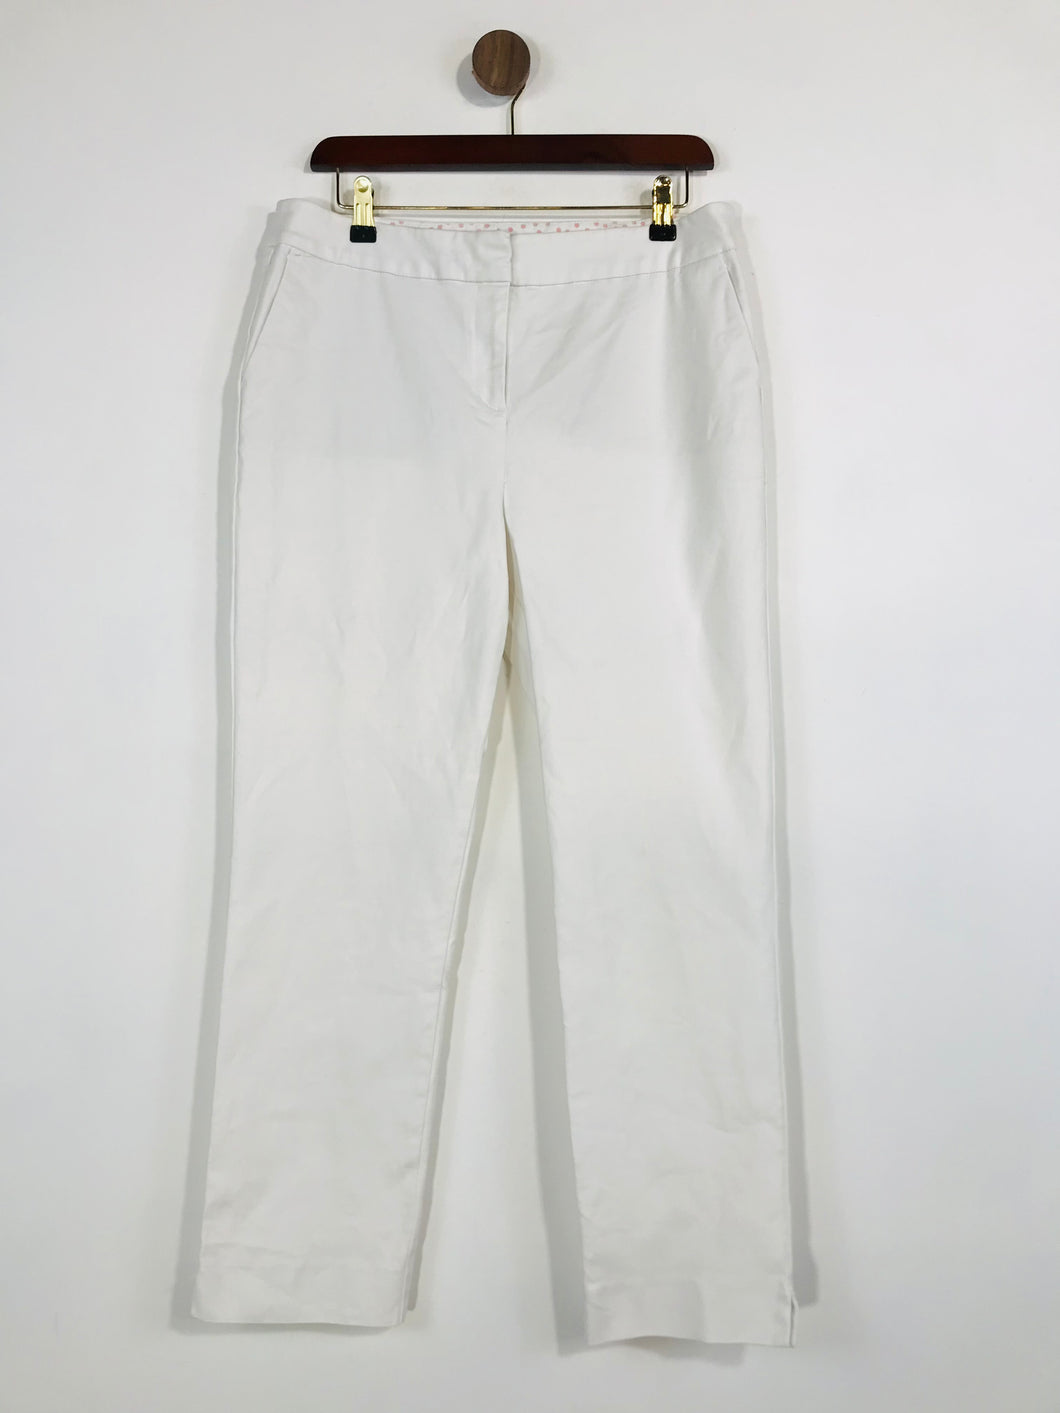 Boden Women's Cotton Chinos Trousers | UK14 | White